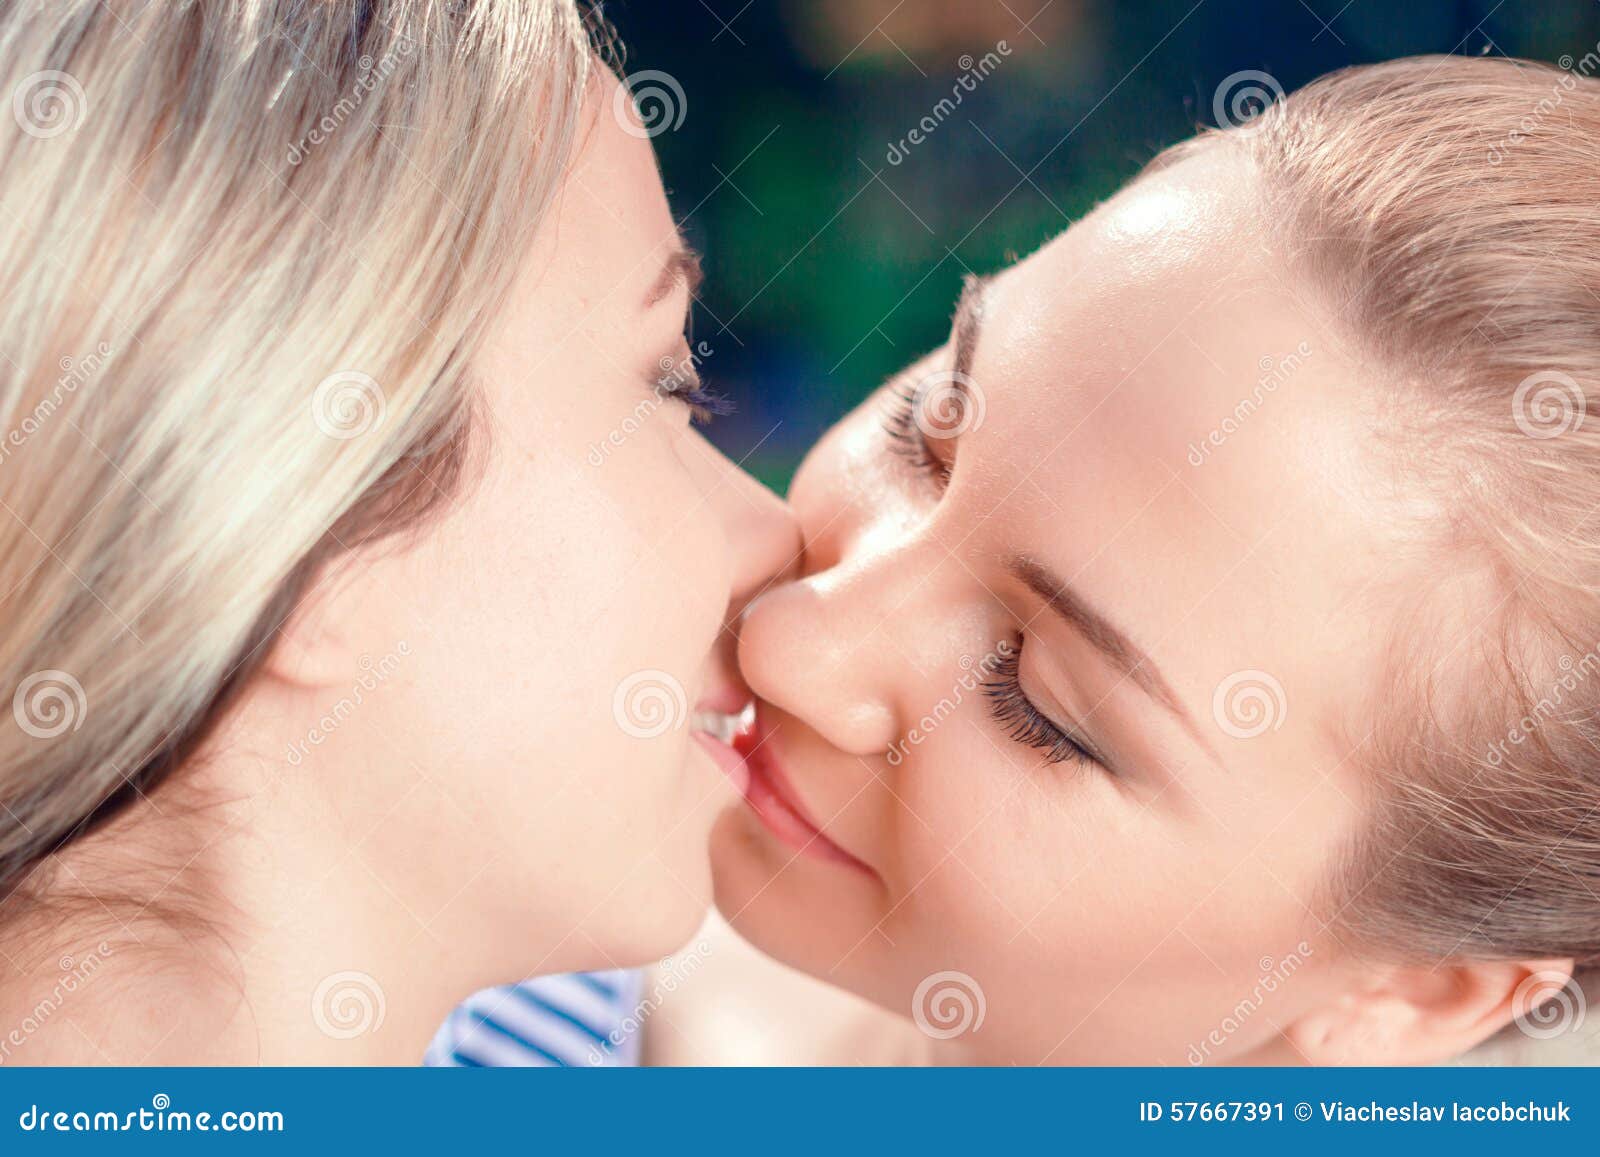 kissing lesbian picture two